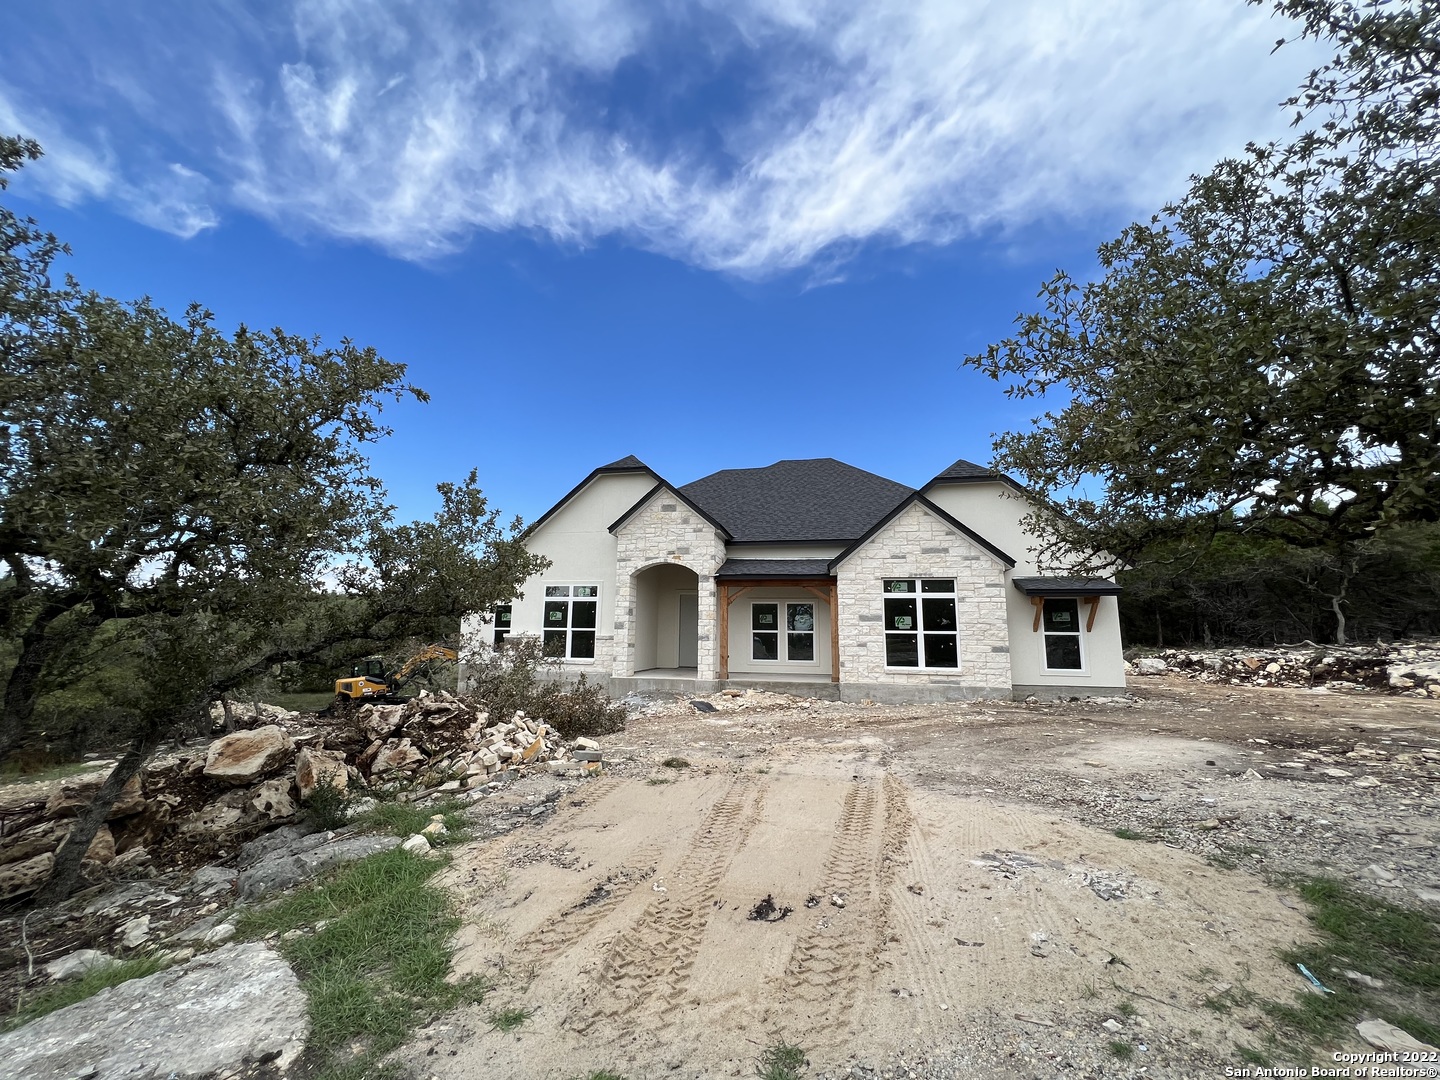 Fall in love with this beautiful 4-bedroom one-story home in the highly desired Cascada community. The house is still under construction and will feature custom cabinets, granite counters, tile floors, modern fixtures, and much more! The builder has selected the finish-outs, and the home sits on a cul-de-sac and 1-acre lot with mature trees, minutes to Canyon Lake, Guadalupe River, and HWY 281.